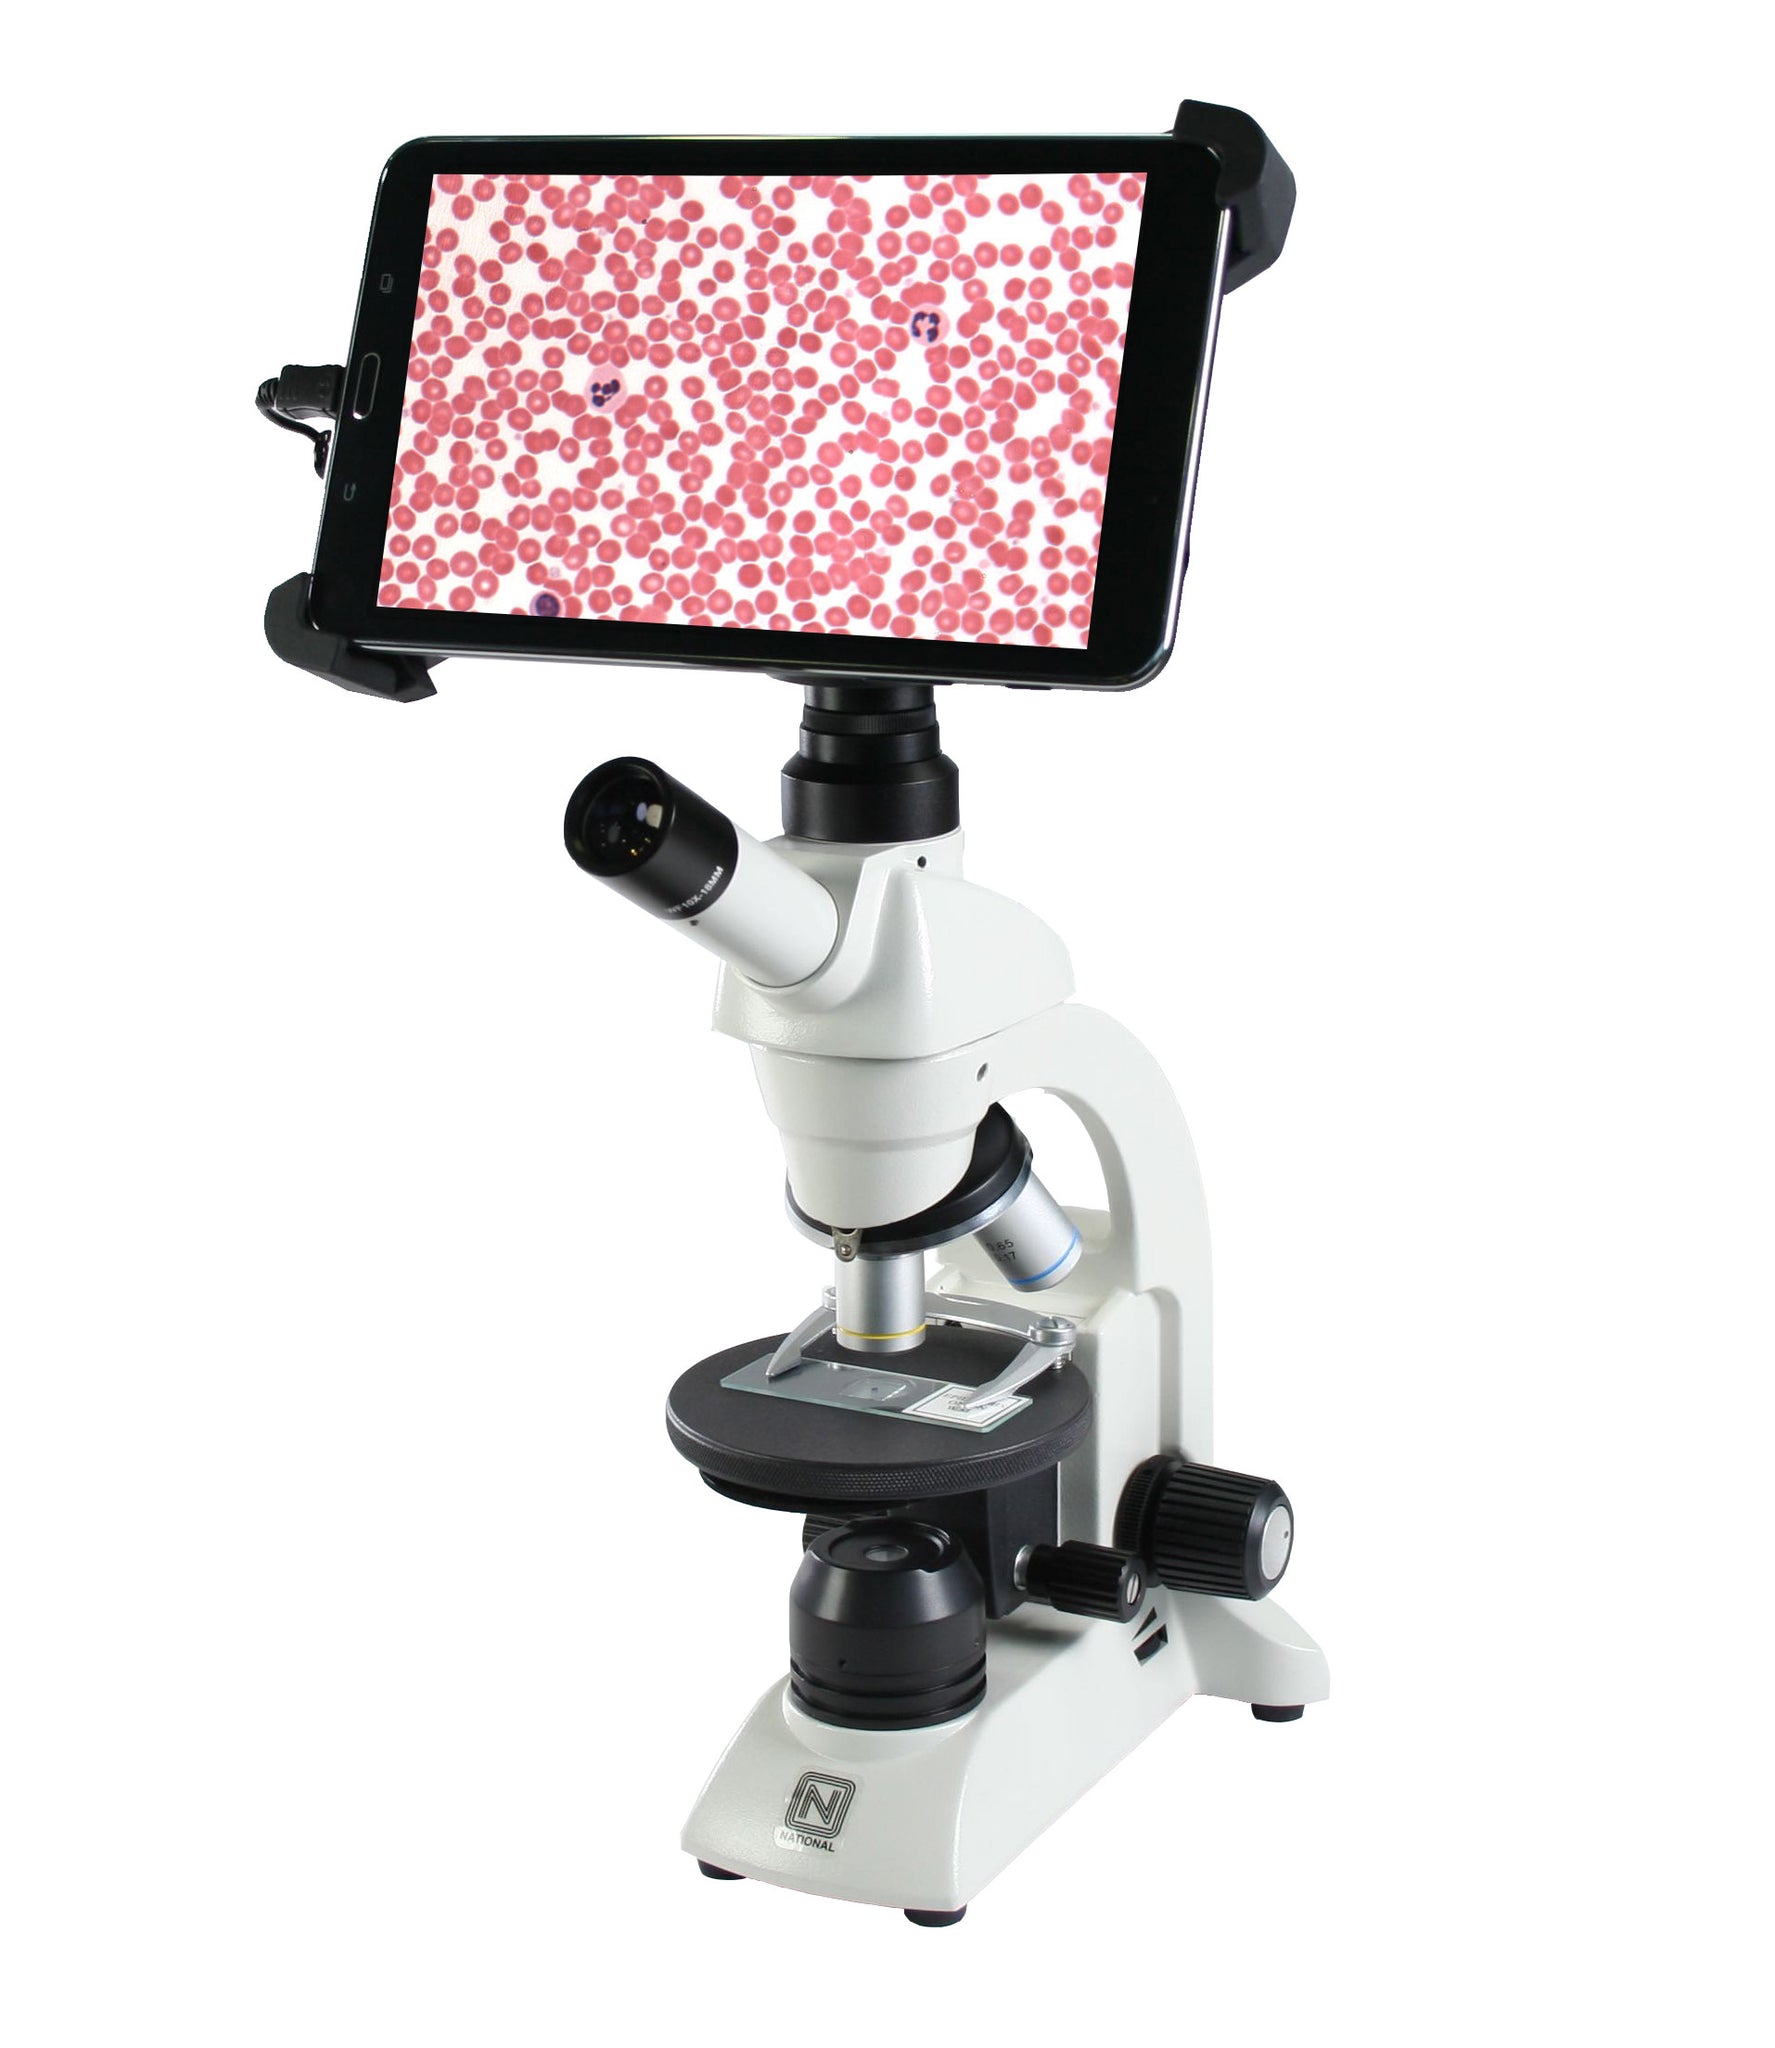 National BTI1-205-LED - LED Microscope with Detachable Tablet